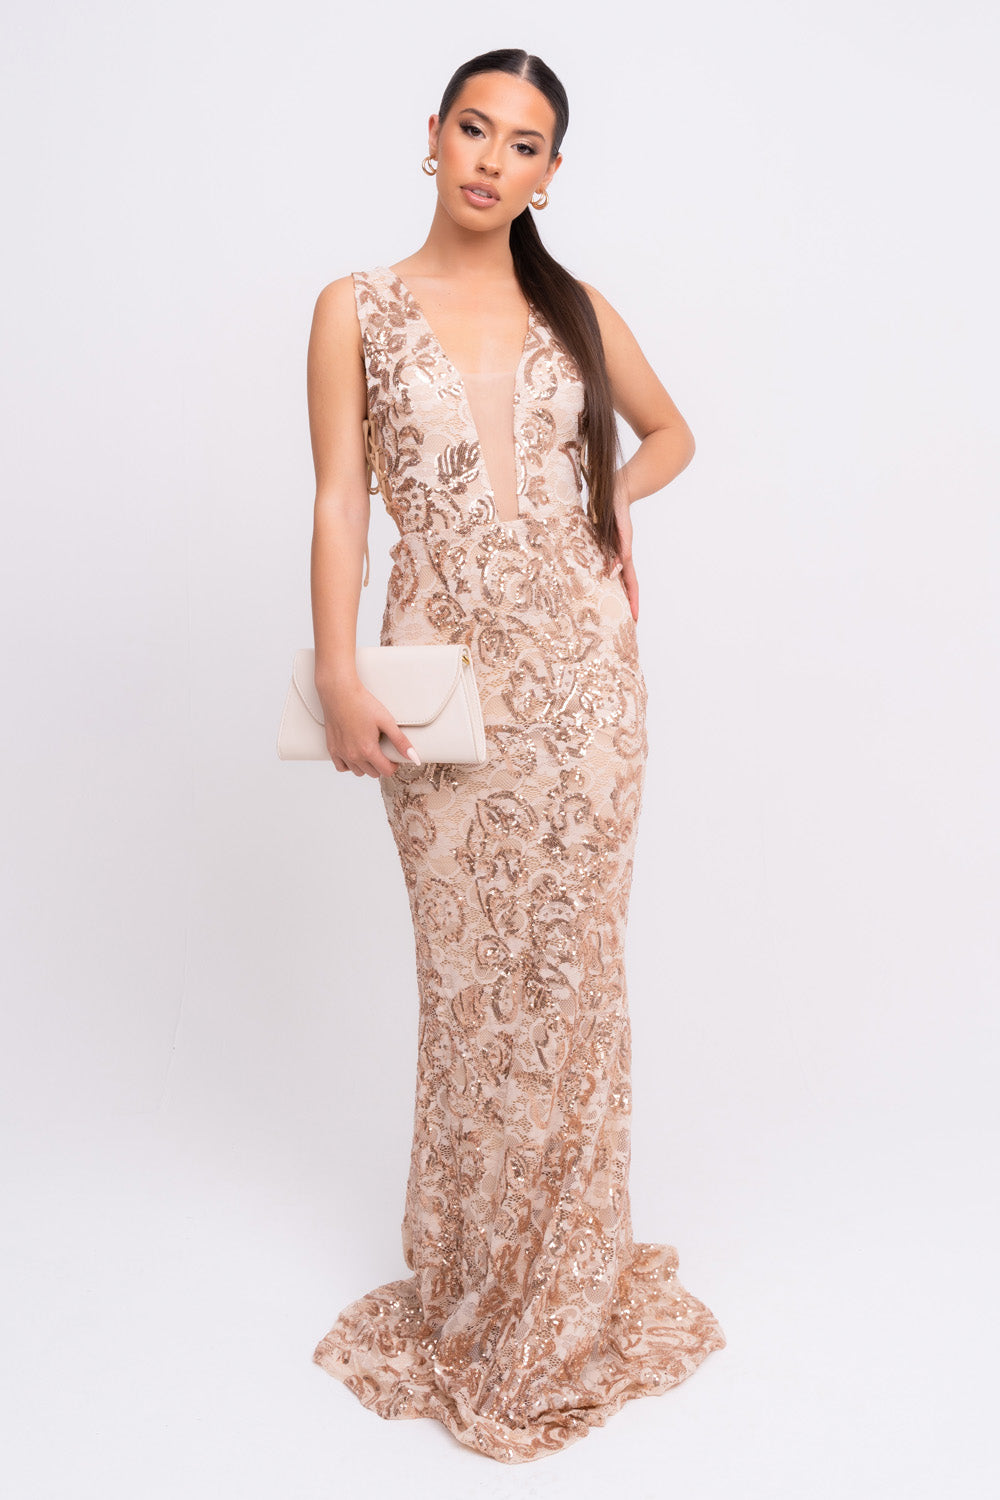 Flora Rose Gold Luxe Deep Plunge Tie Side Floral Lace Sequin Embellished Maxi Dress